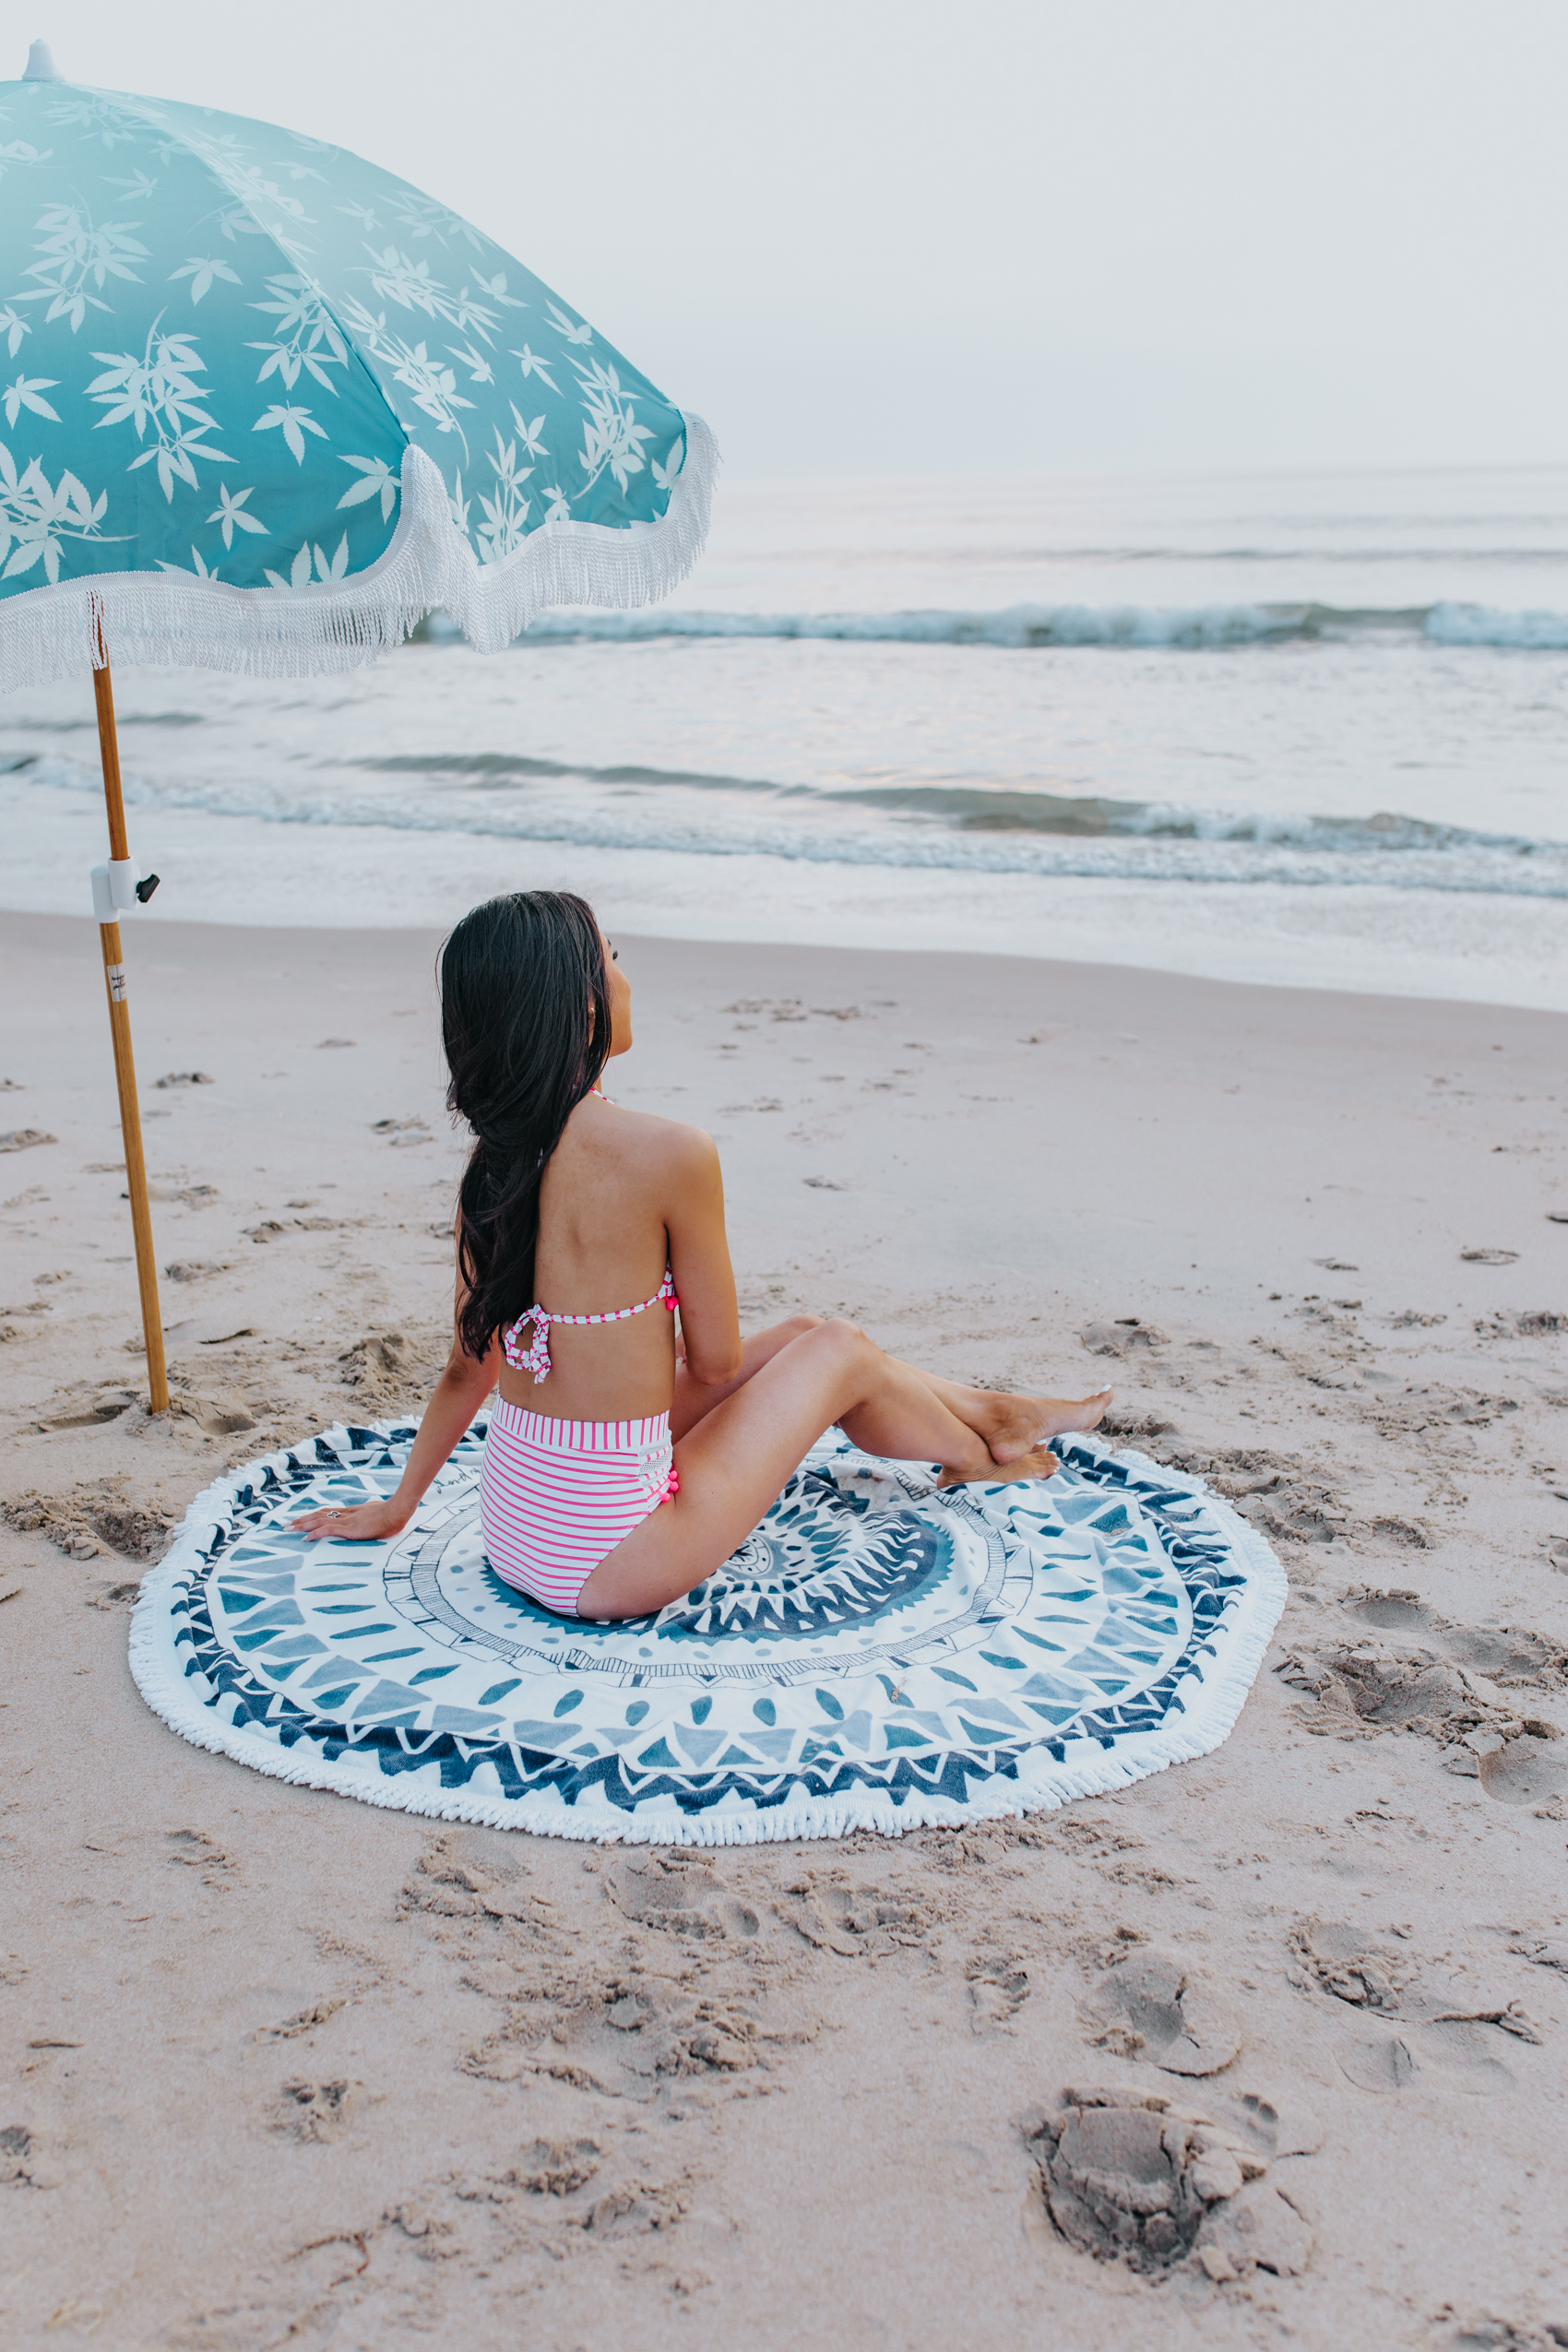 Blogger Hoang-Kim at the Virginia Beach Oceanfront with a Business & Pleasure beach umbrella and Beach People Roundie